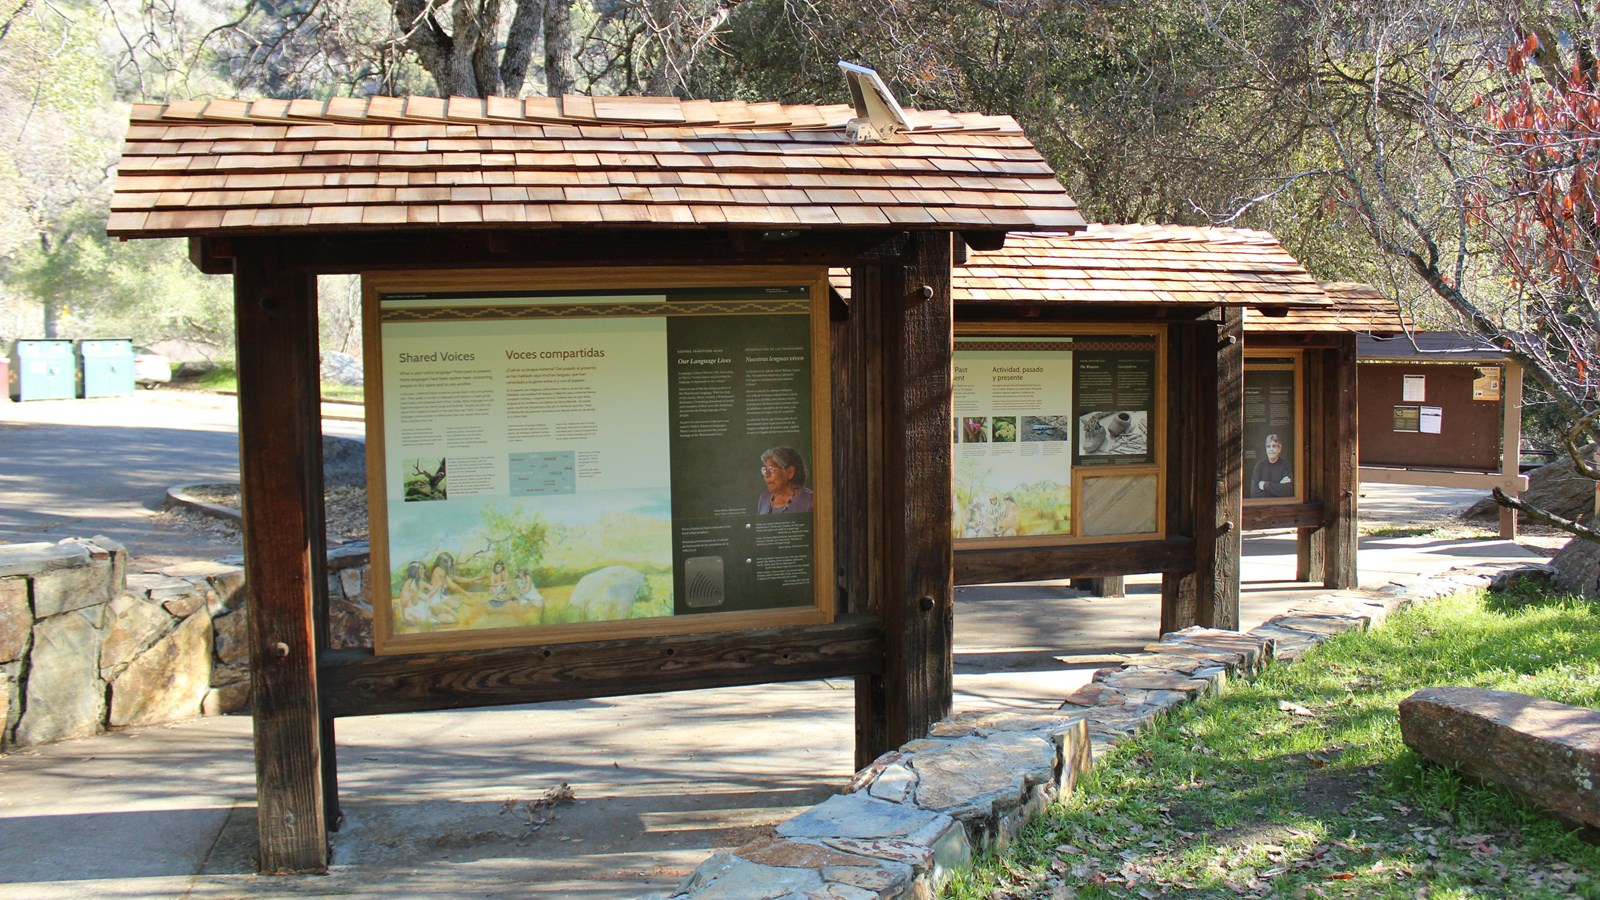 Three free-standing, wood exhibit panels and a bulletin board are found on the picnic area sidewalk.